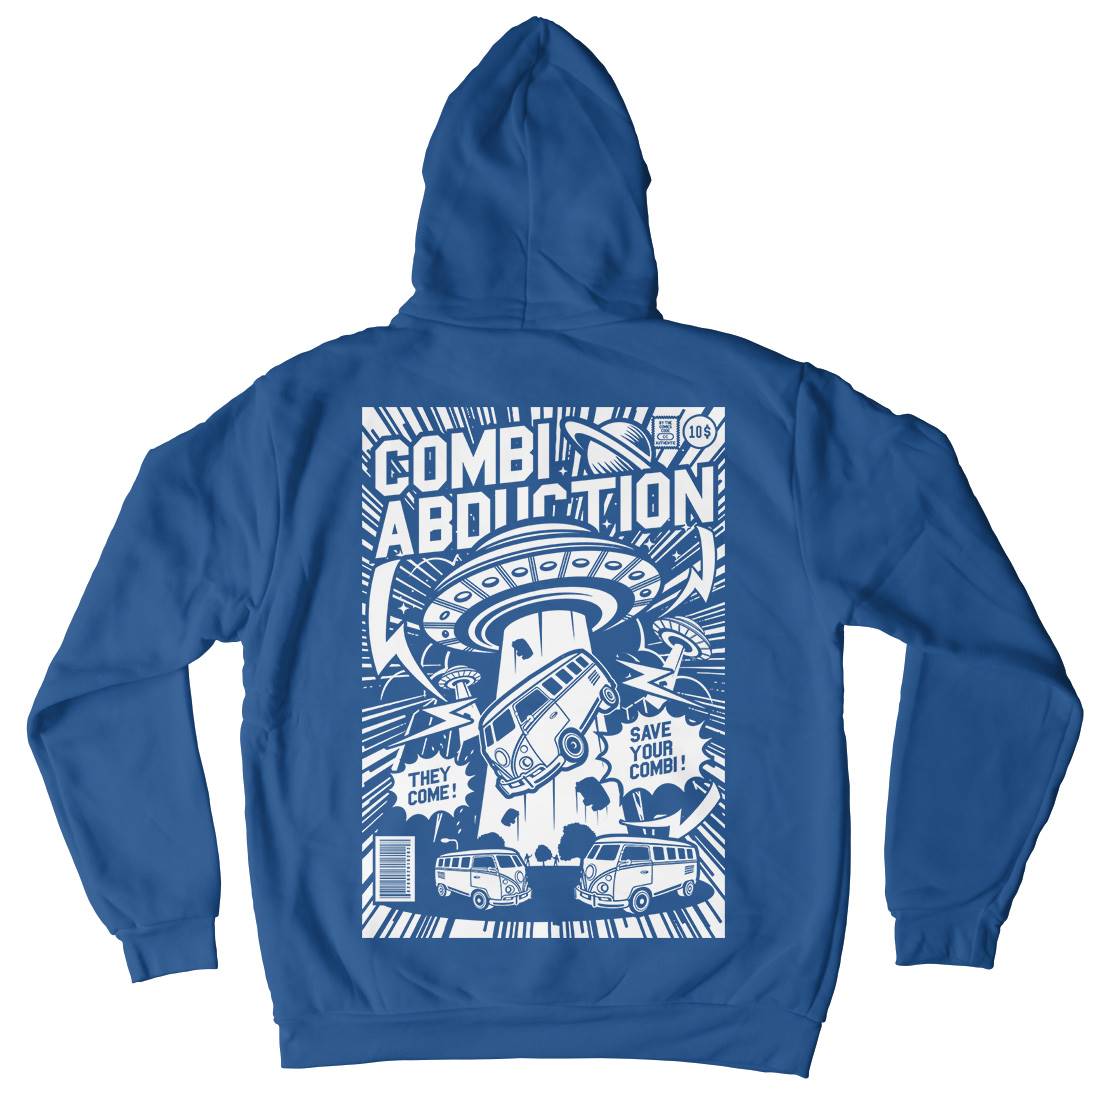 Combi Abduction Kids Crew Neck Hoodie Space A220